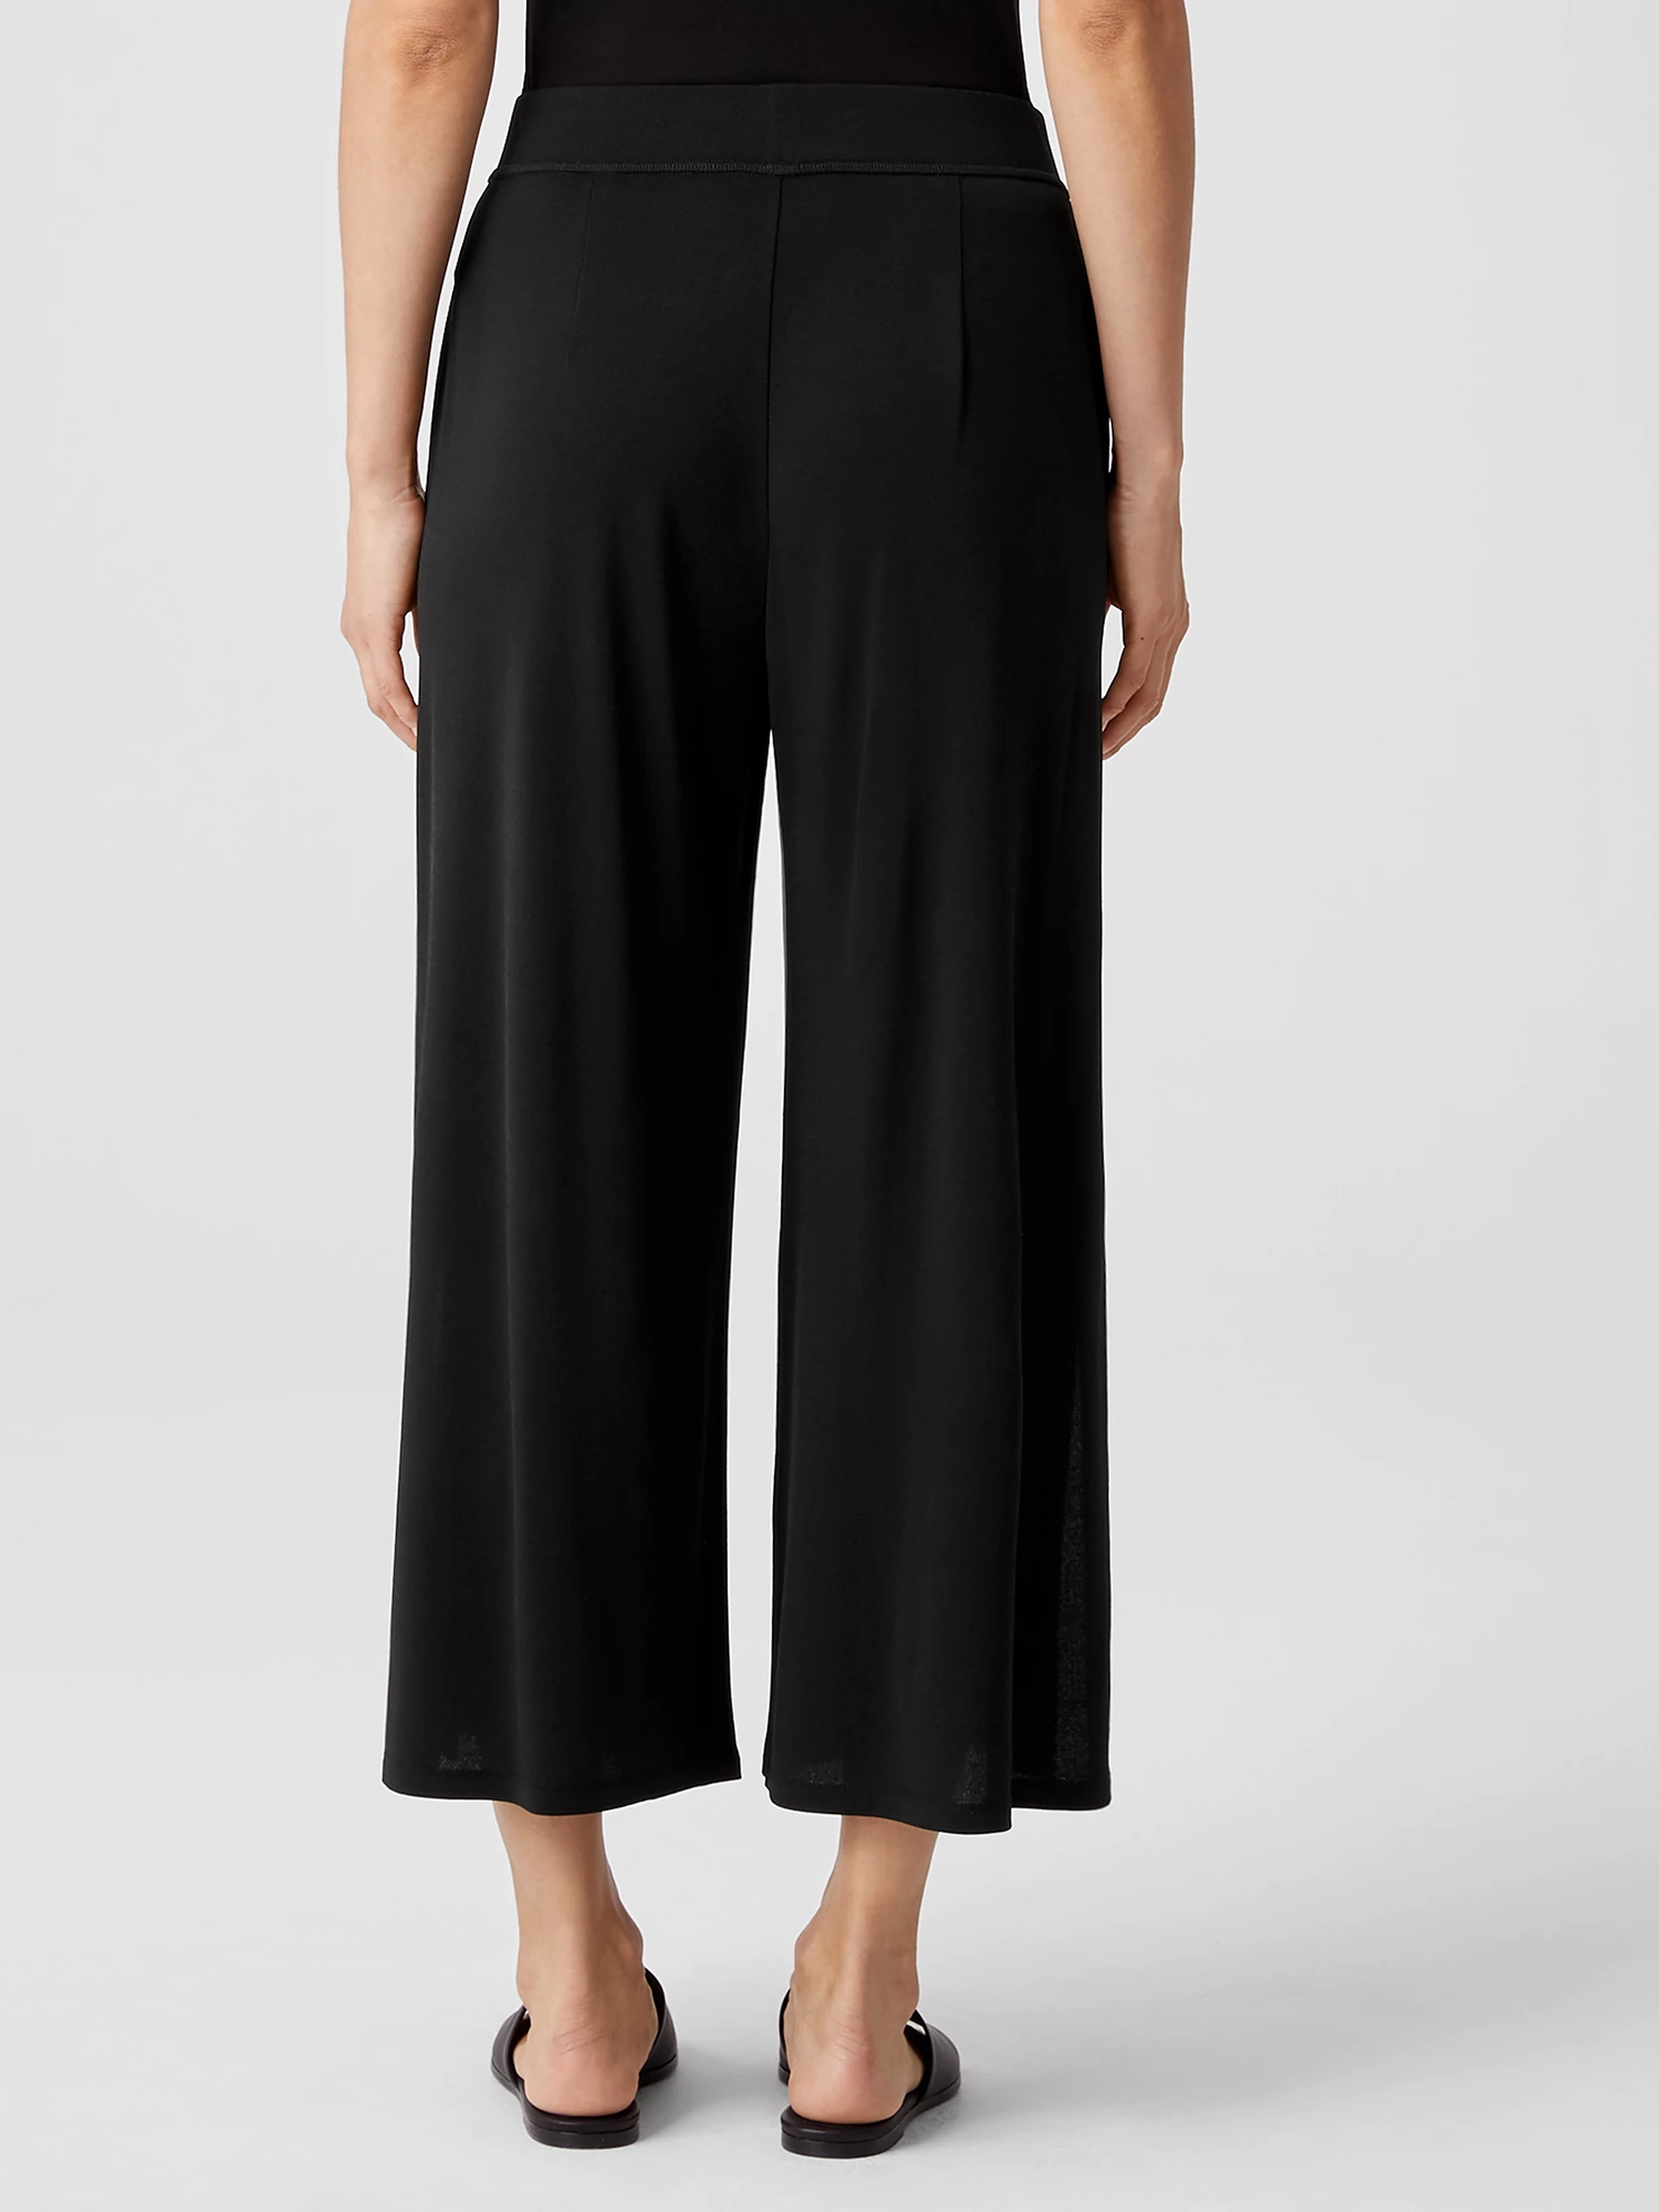 Stretch Silk Jersey Wide-Leg Pant with Slits | EILEEN FISHER